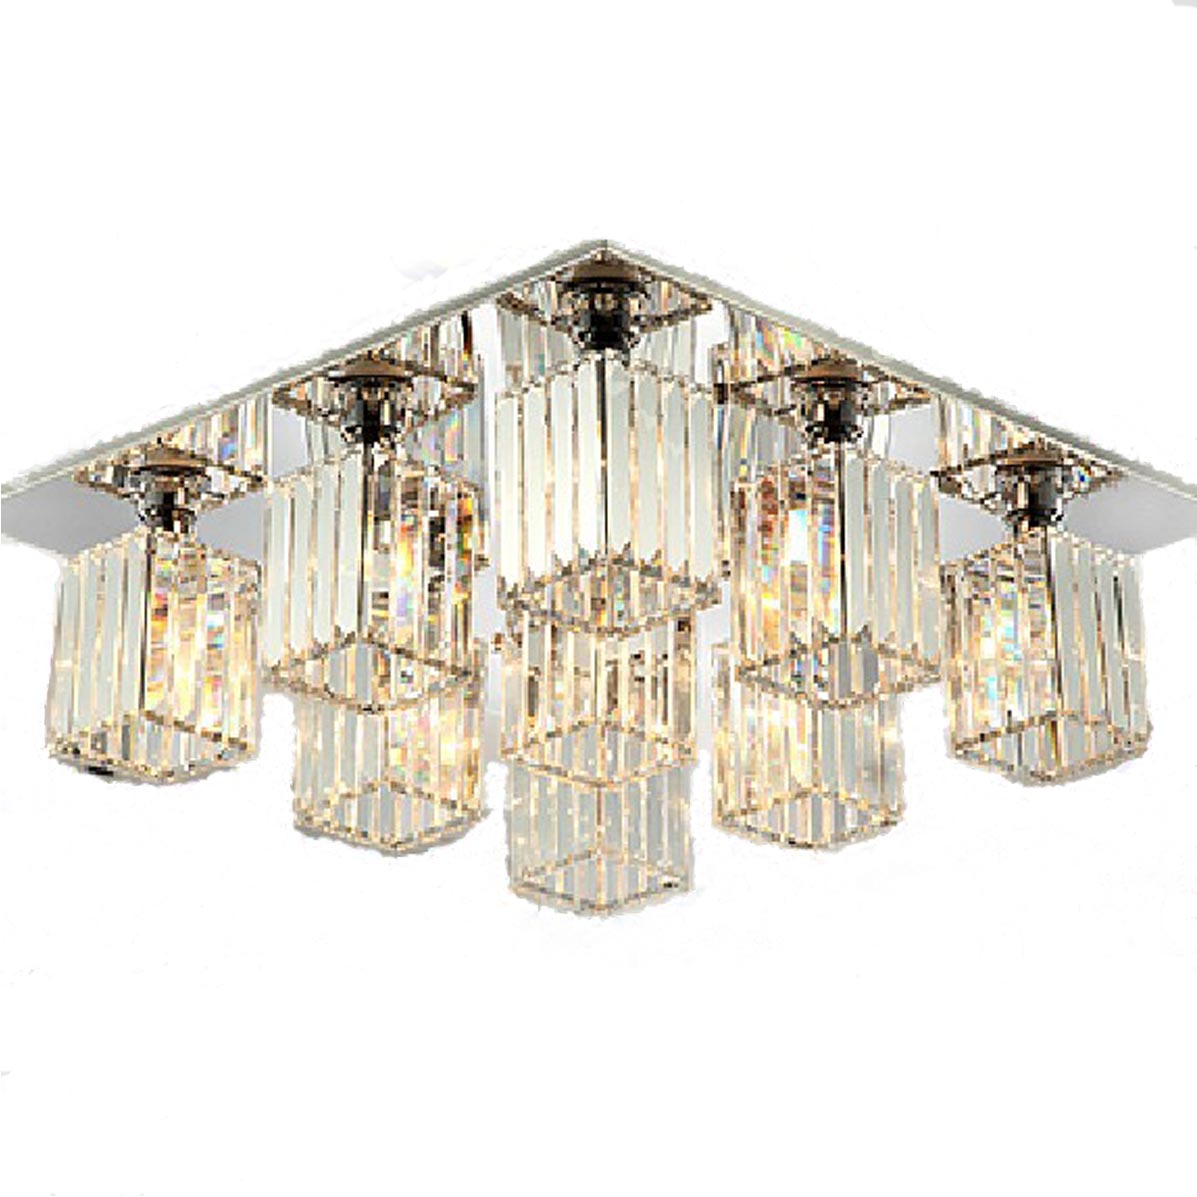 Ceiling lamp for Hotel room HL-9507-9X-Ceiling lamp for Hotel room HL-9507-9X